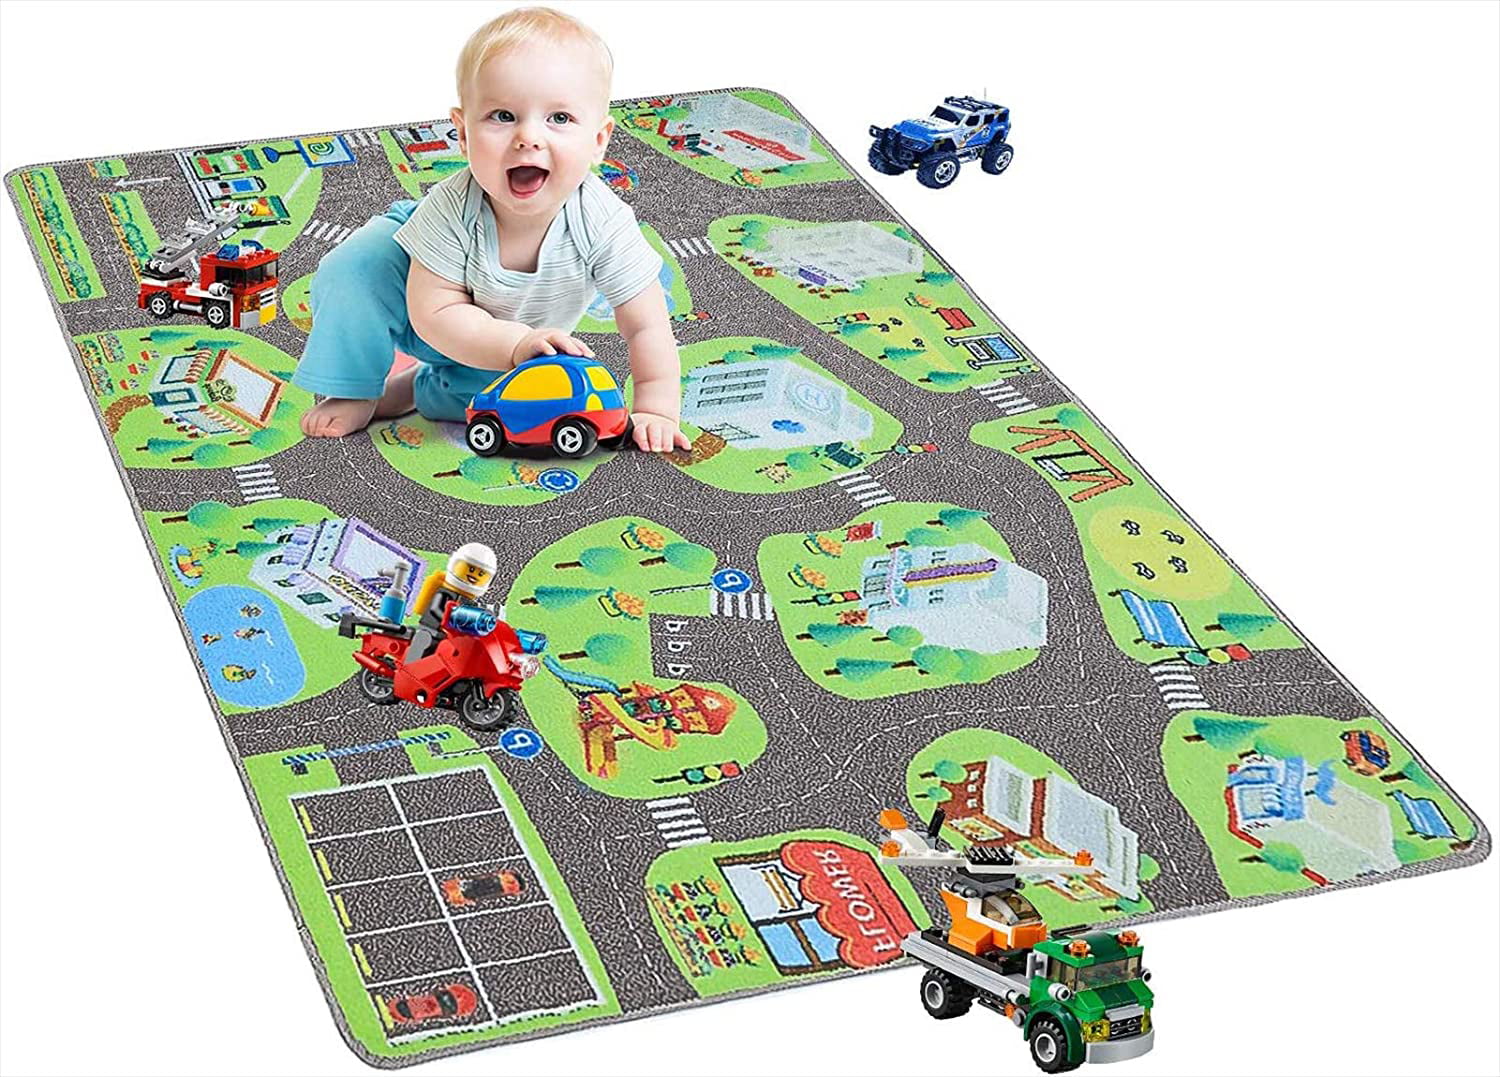 Car Rug to Have Hours of Fun on,Area Rug Mat with Non-Slip Backing,Car Mat Great for Baby Girl Boy Kids Rug Play Mat for Toy Cars Colorful and Fun Play Rugs with Roads for Bedroom Kidroom